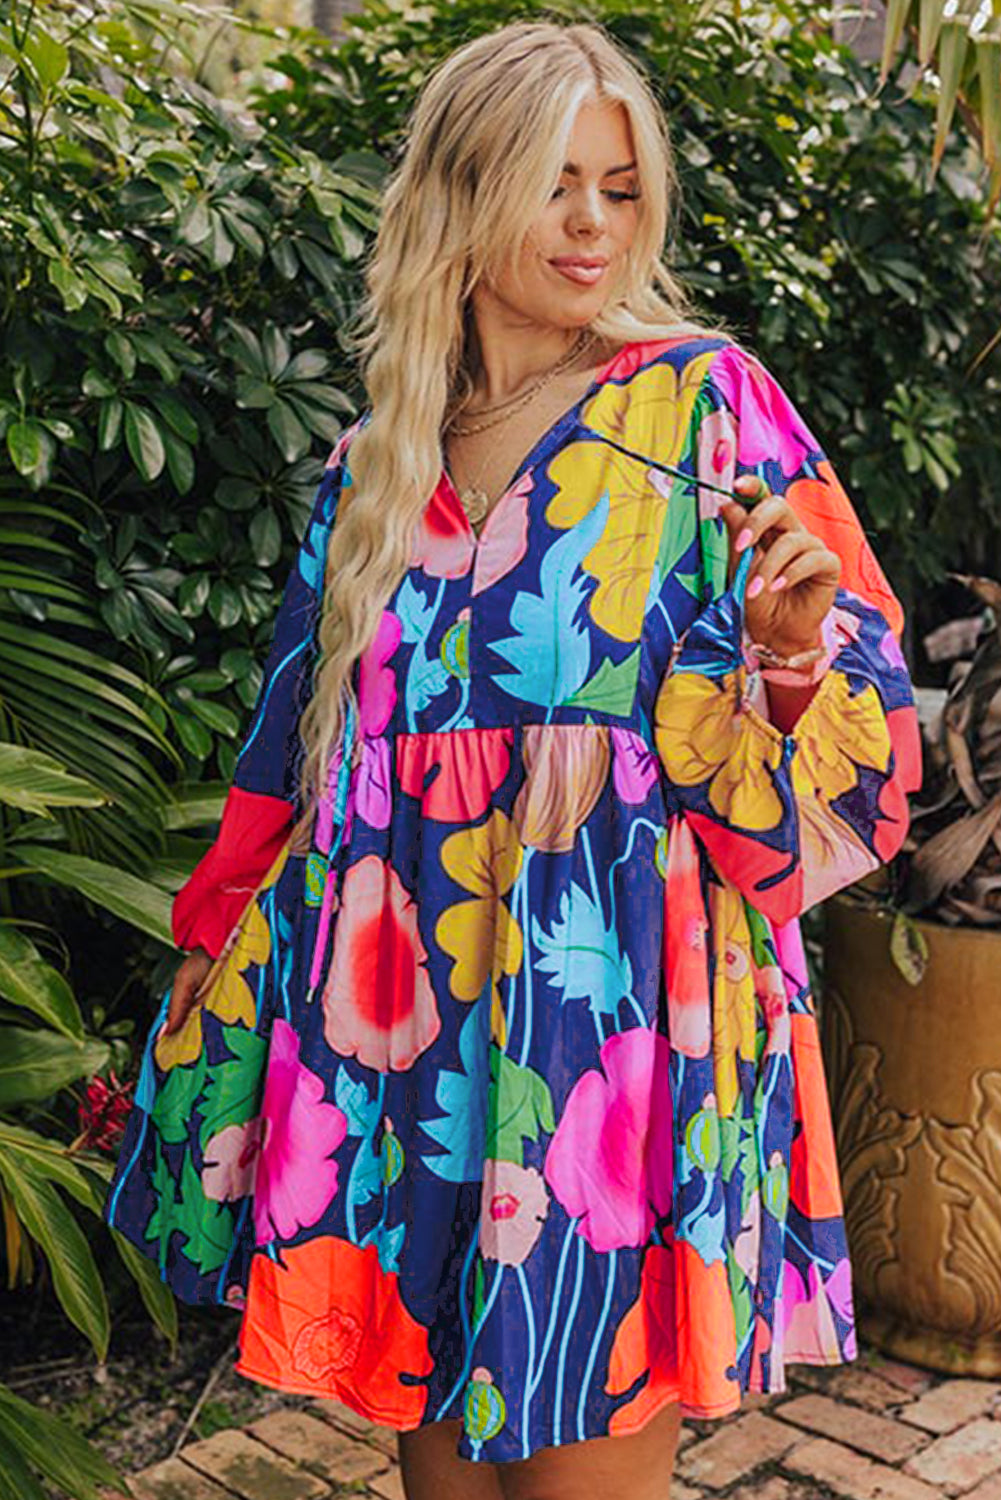 Colorful Floral V Neck Balloon Sleeve Plus Size Babydoll Dress